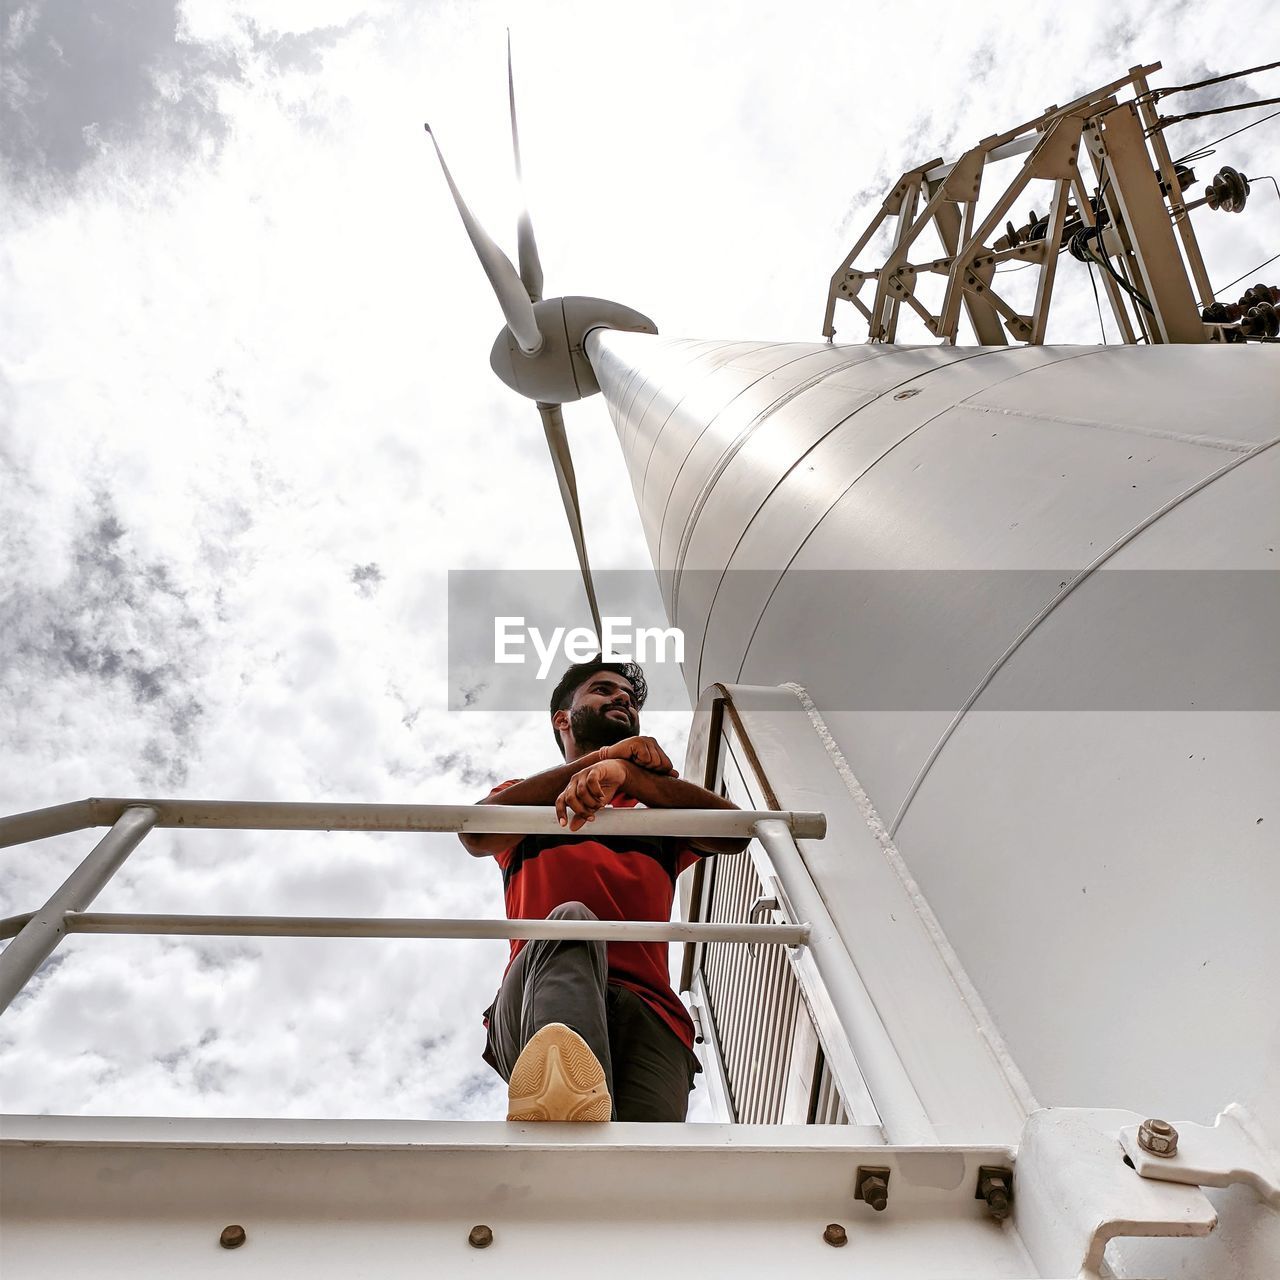 Low angle view of man standing on wind turbine